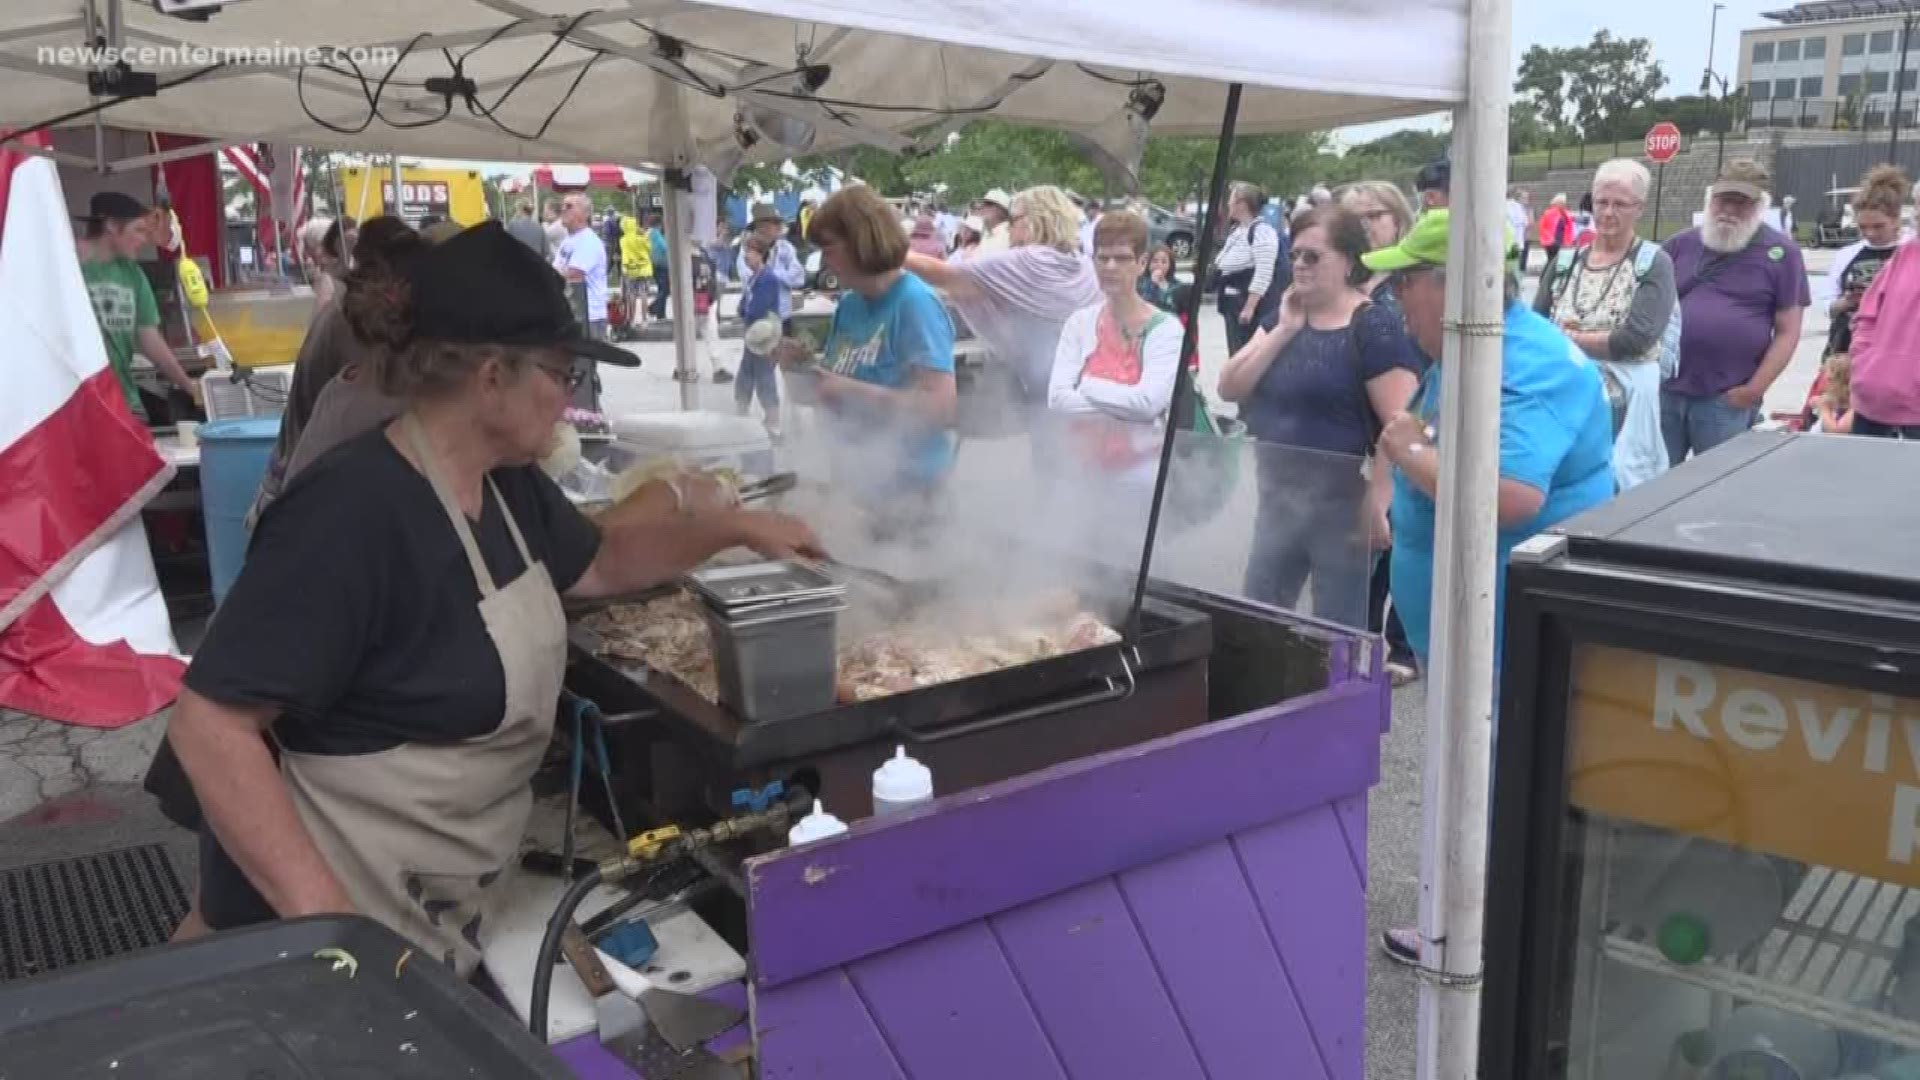 Food from all over the globe is being served at the American Folk Festival in Bangor.